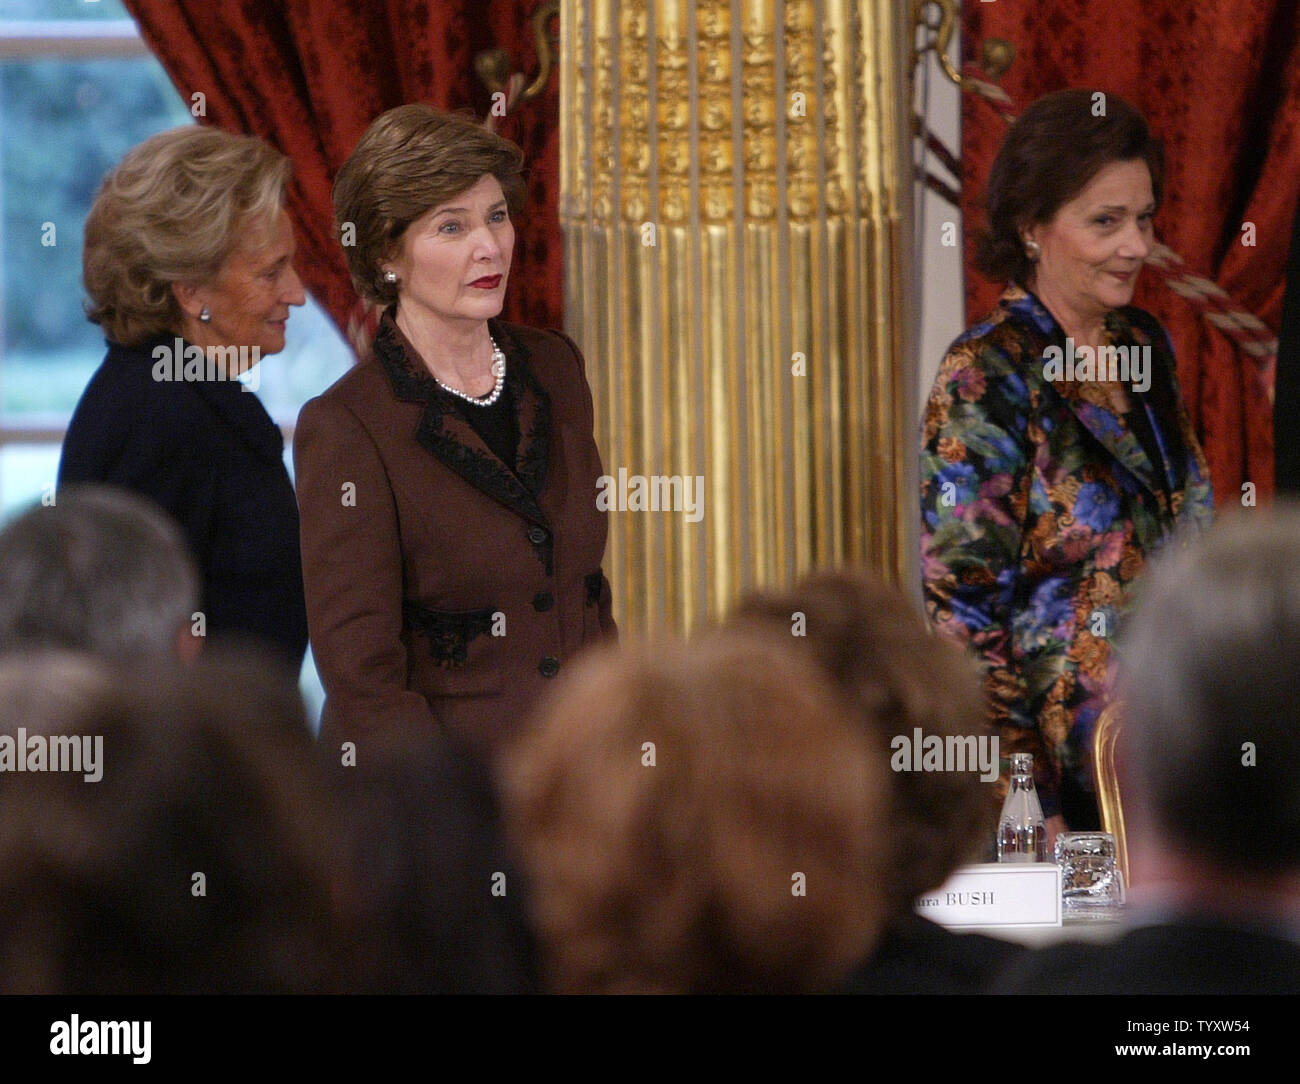 Suzanne Mubarak (R), wife of the Egyptian president and Bernadette Chirac (L), wife of the French president  walk past U.S. First Lady Laura Bush at the start of a conference at the Elysee Palace in Paris, January 17, 2007. The First Ladies met to form a committee for the defense of lost or exploited children. (UPI Photo/Eco Clement) Stock Photo